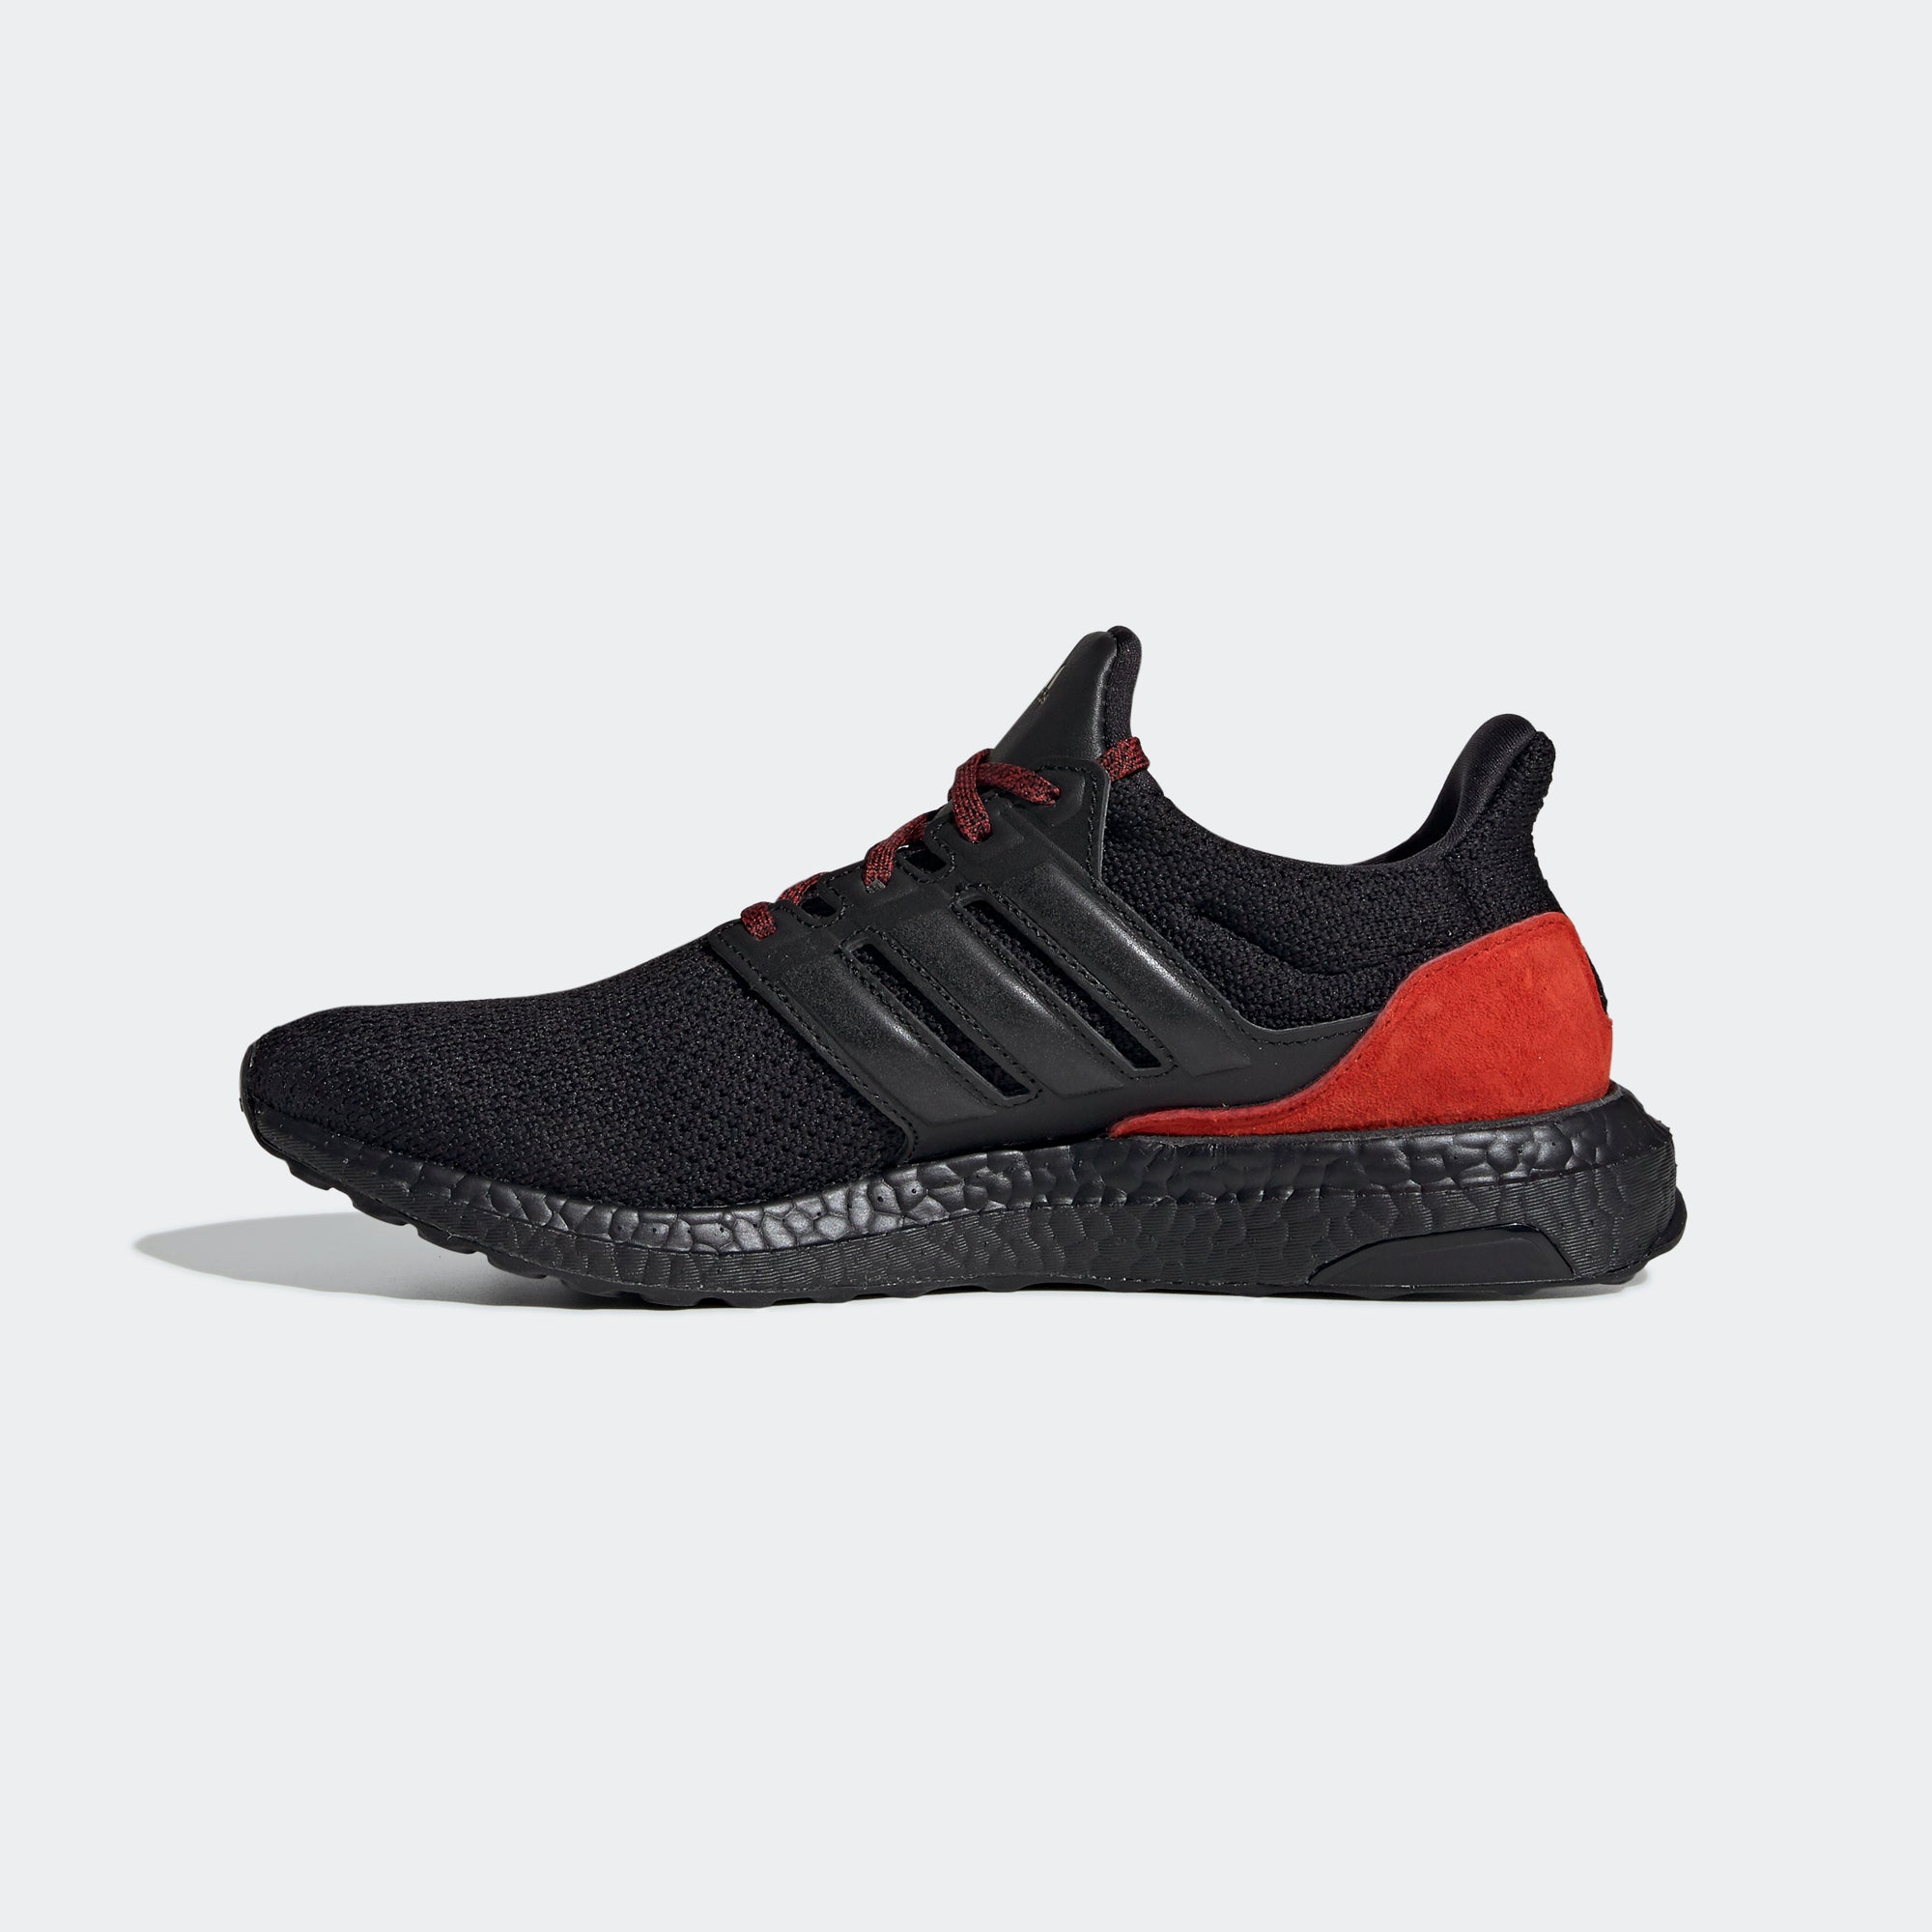 Adidas Ultraboost Dna Shoes Black Chicago City Sports